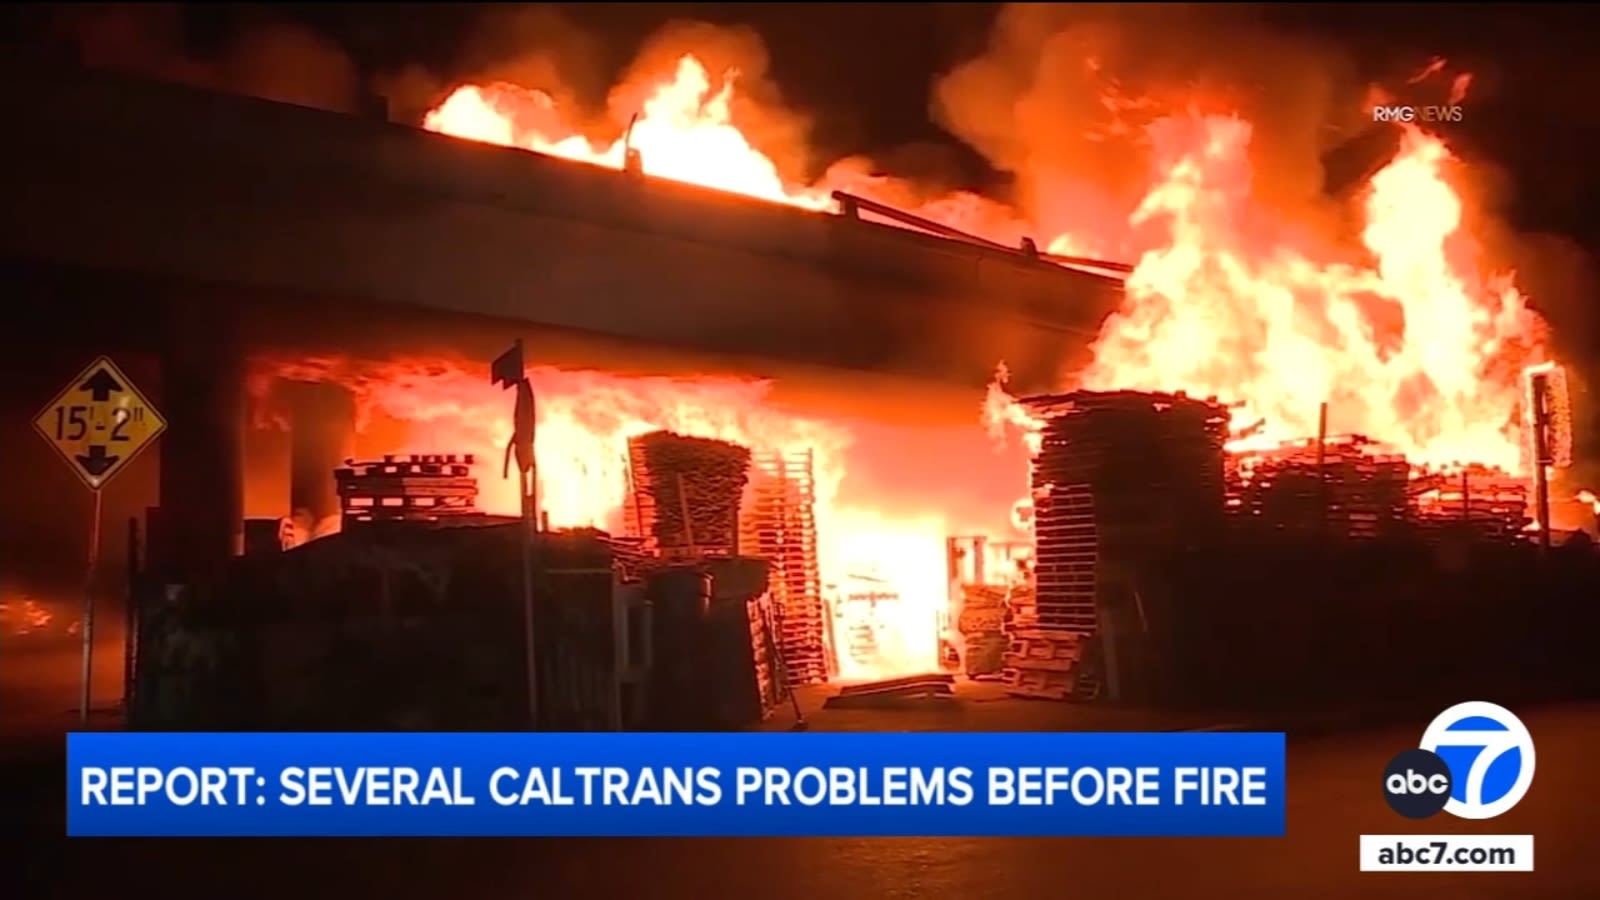 Caltrans could have taken steps in preventing 10 Freeway fire, report says